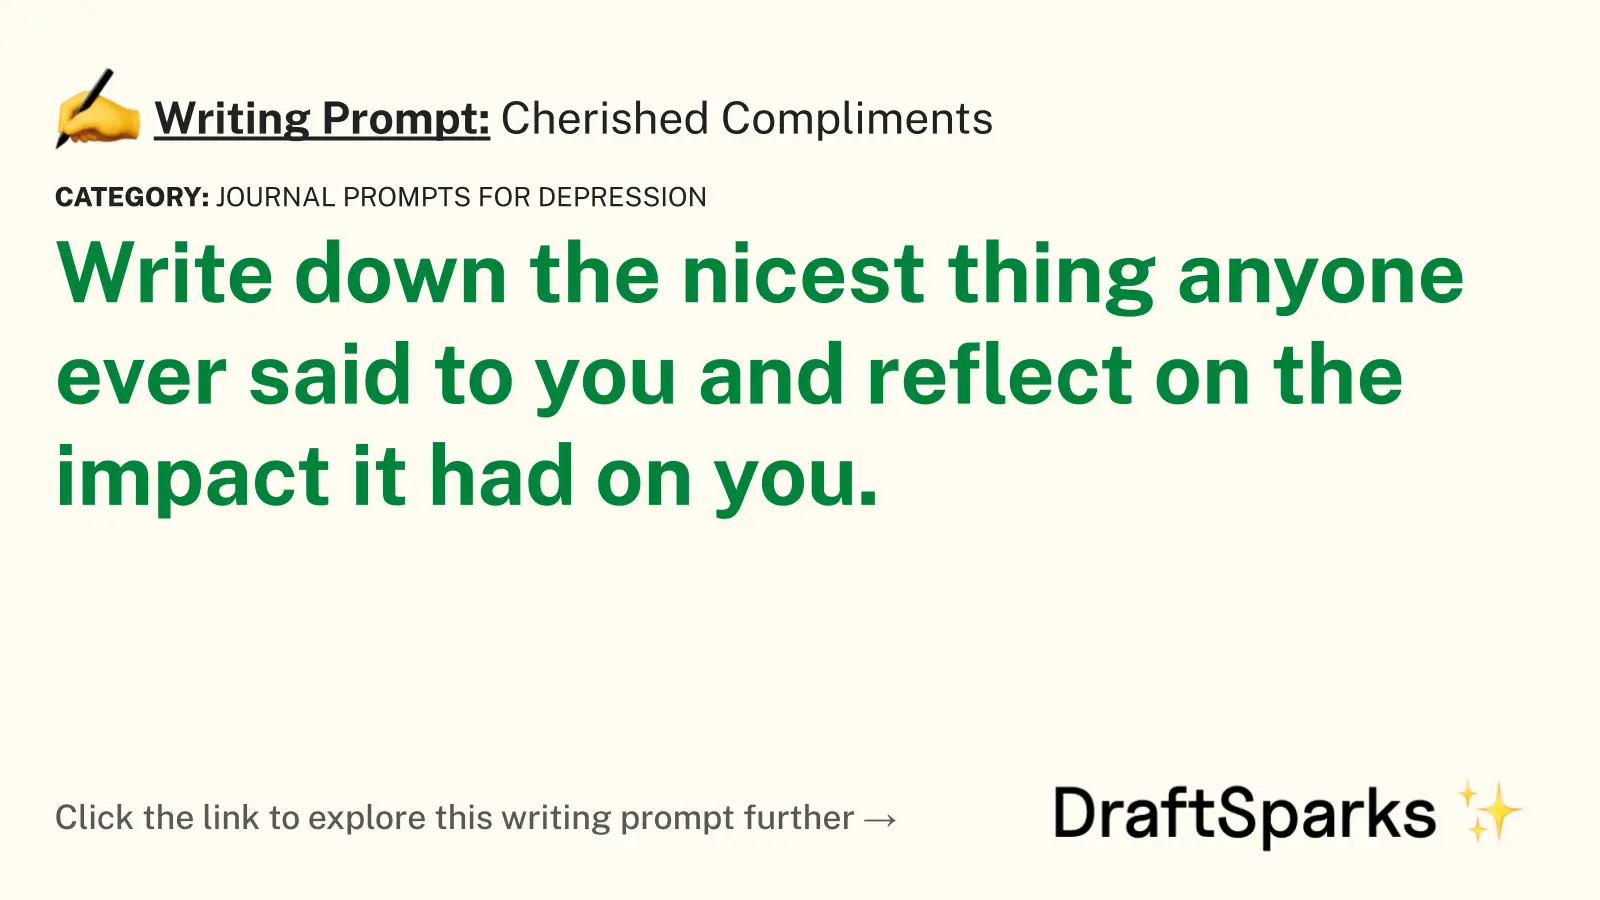 Cherished Compliments